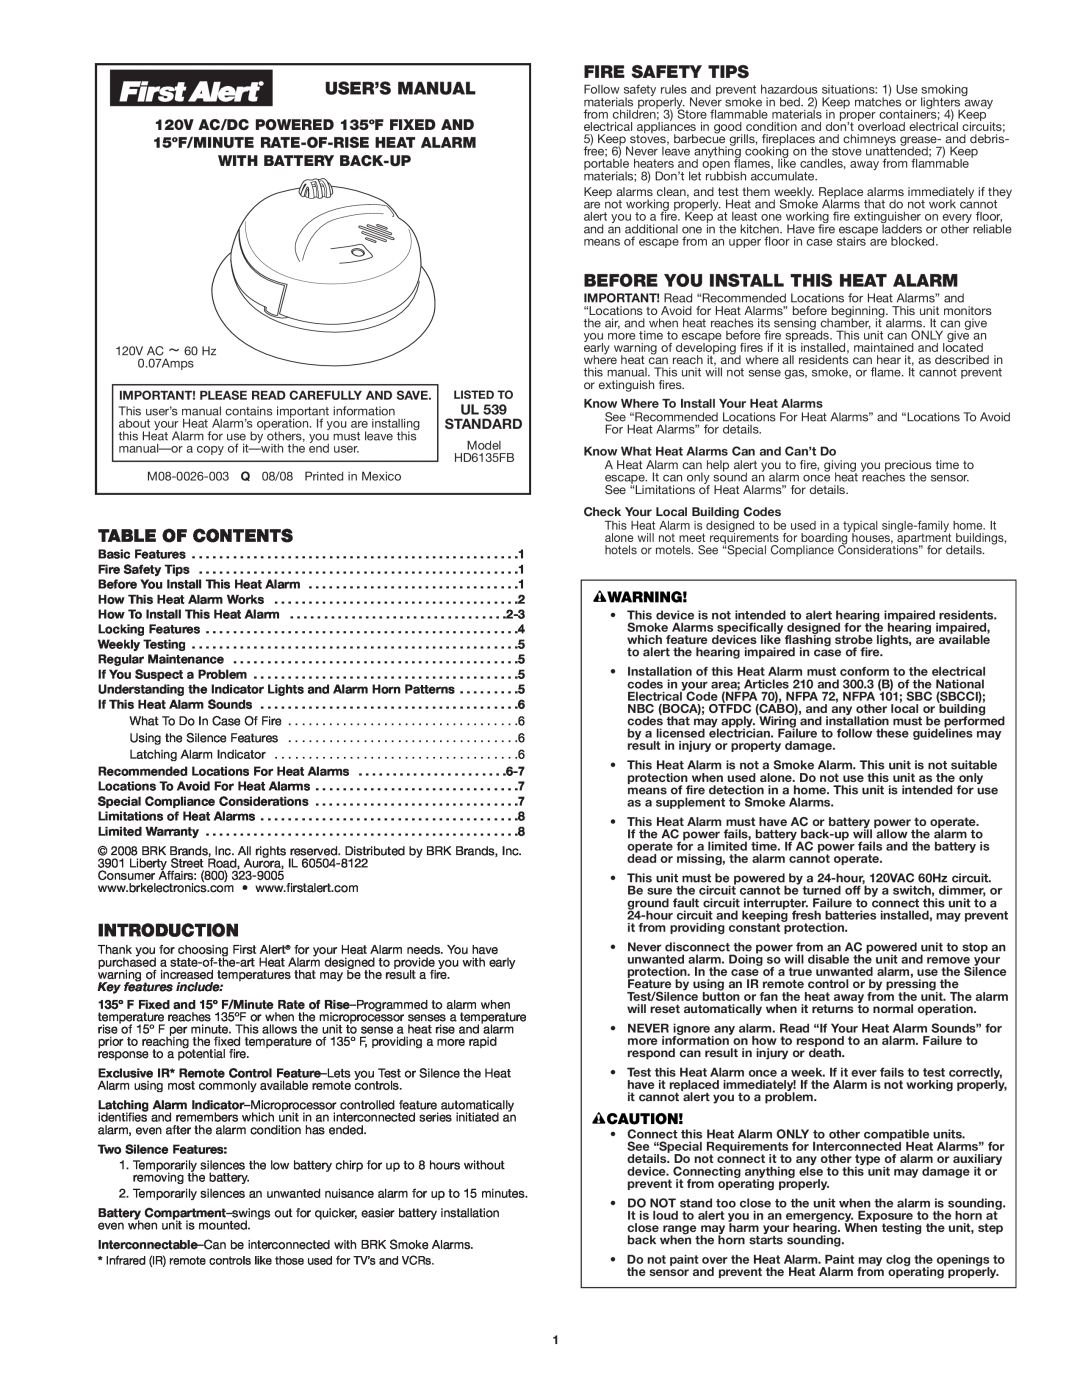 First Alert HD6135FB user manual User’S Manual, Fire Safety Tips, Before You Install This Heat Alarm, Table Of Contents 